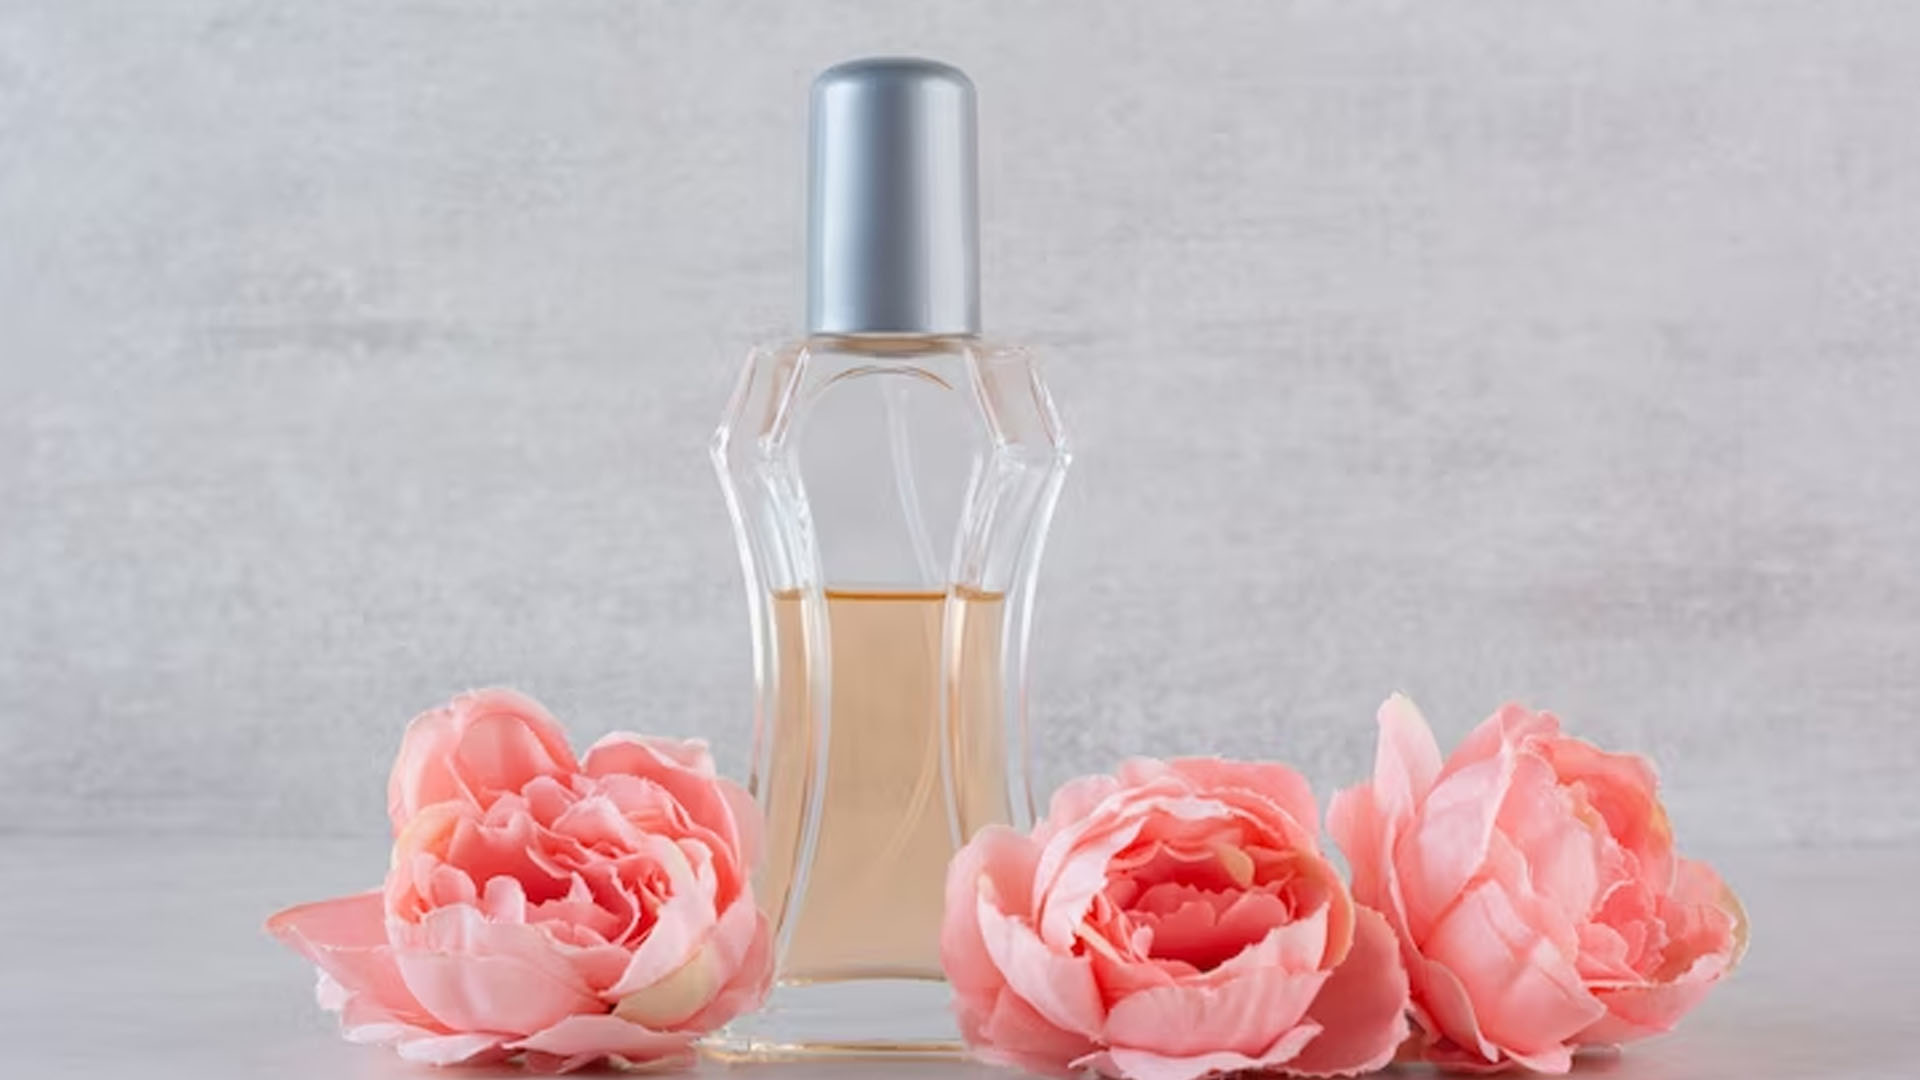 Does Rose Water Have Health Benefits?